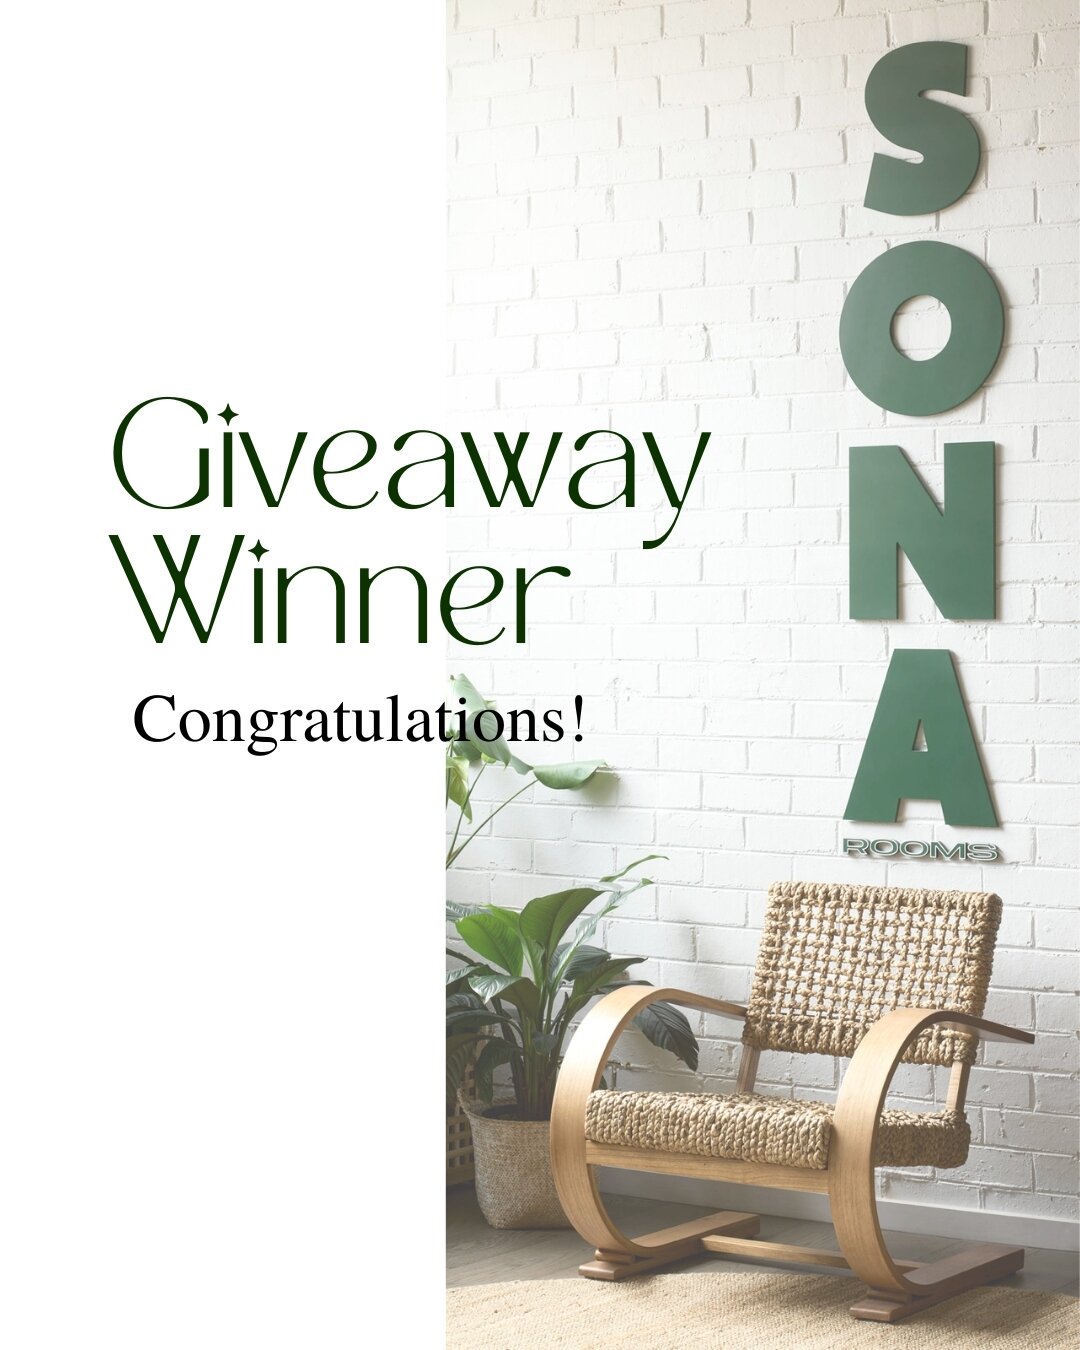 Congratulations to Volkan @volkan_onmove the lucky winner of our Sauna Pack raffle! 🎉 Your journey to relaxation and wellness begins now. Thank you for joining us at our open day. Enjoy your soothing experience with Sona Rooms. 🙏🏽